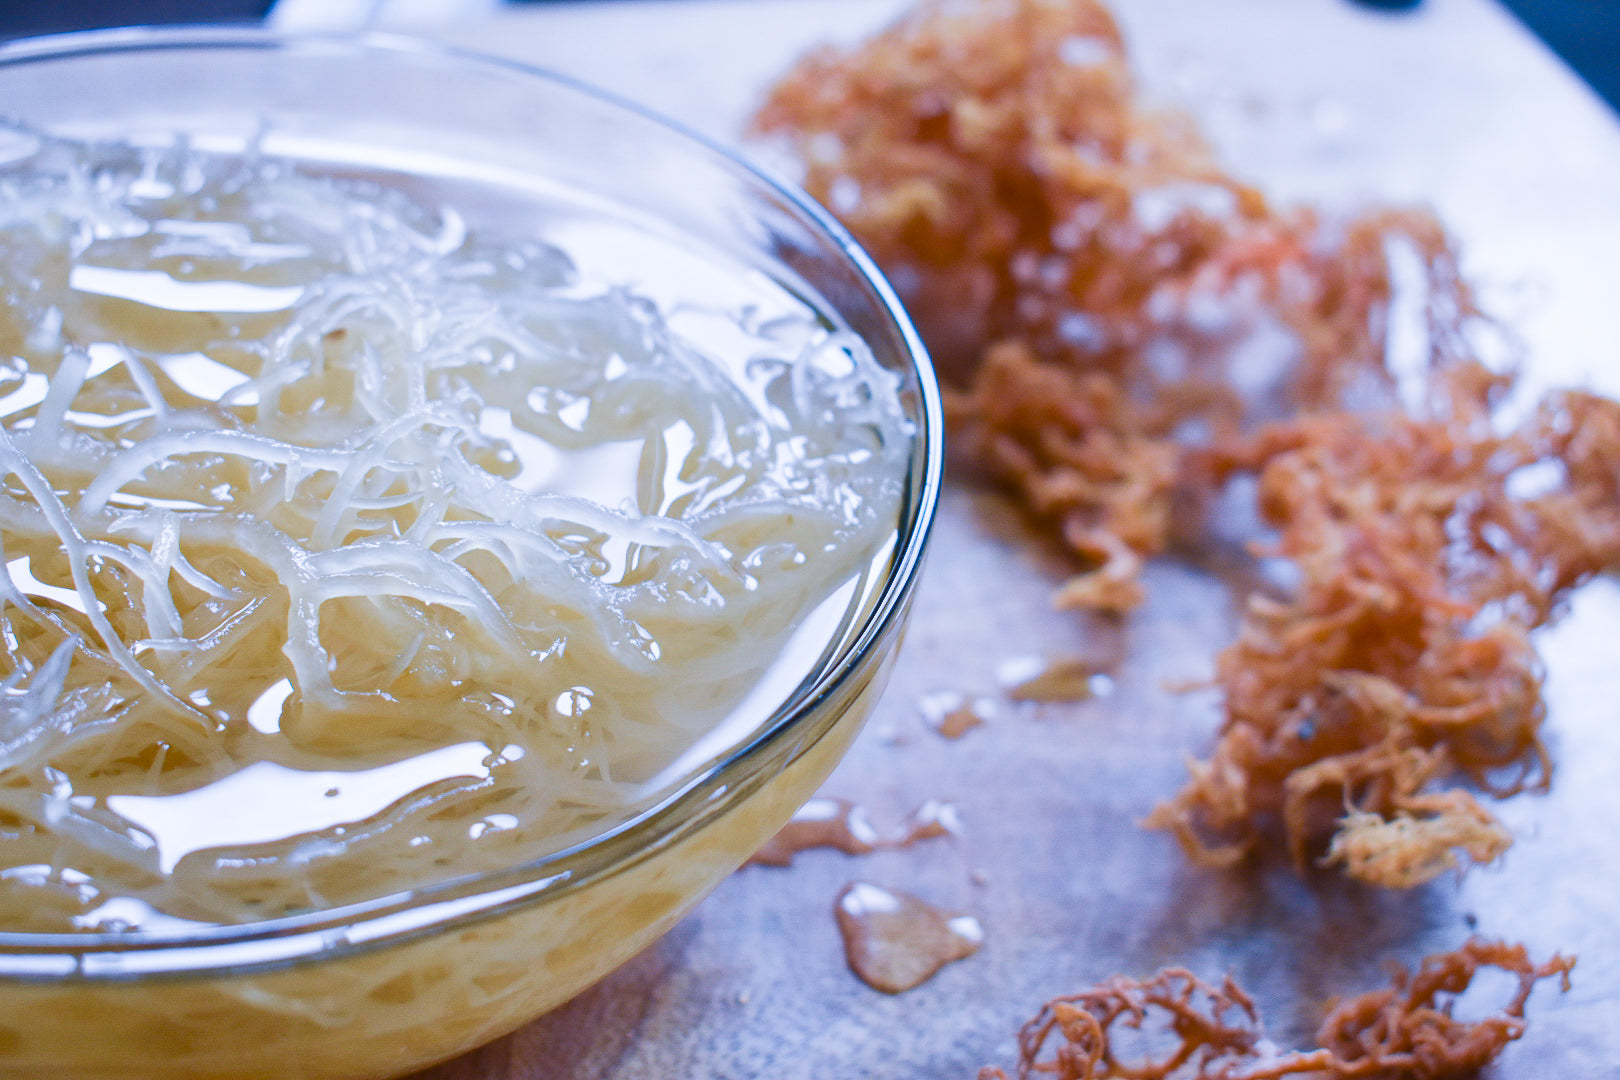 wildcrafted pure golden dried sea moss, ethically harvested and sundried. available in norway and the world